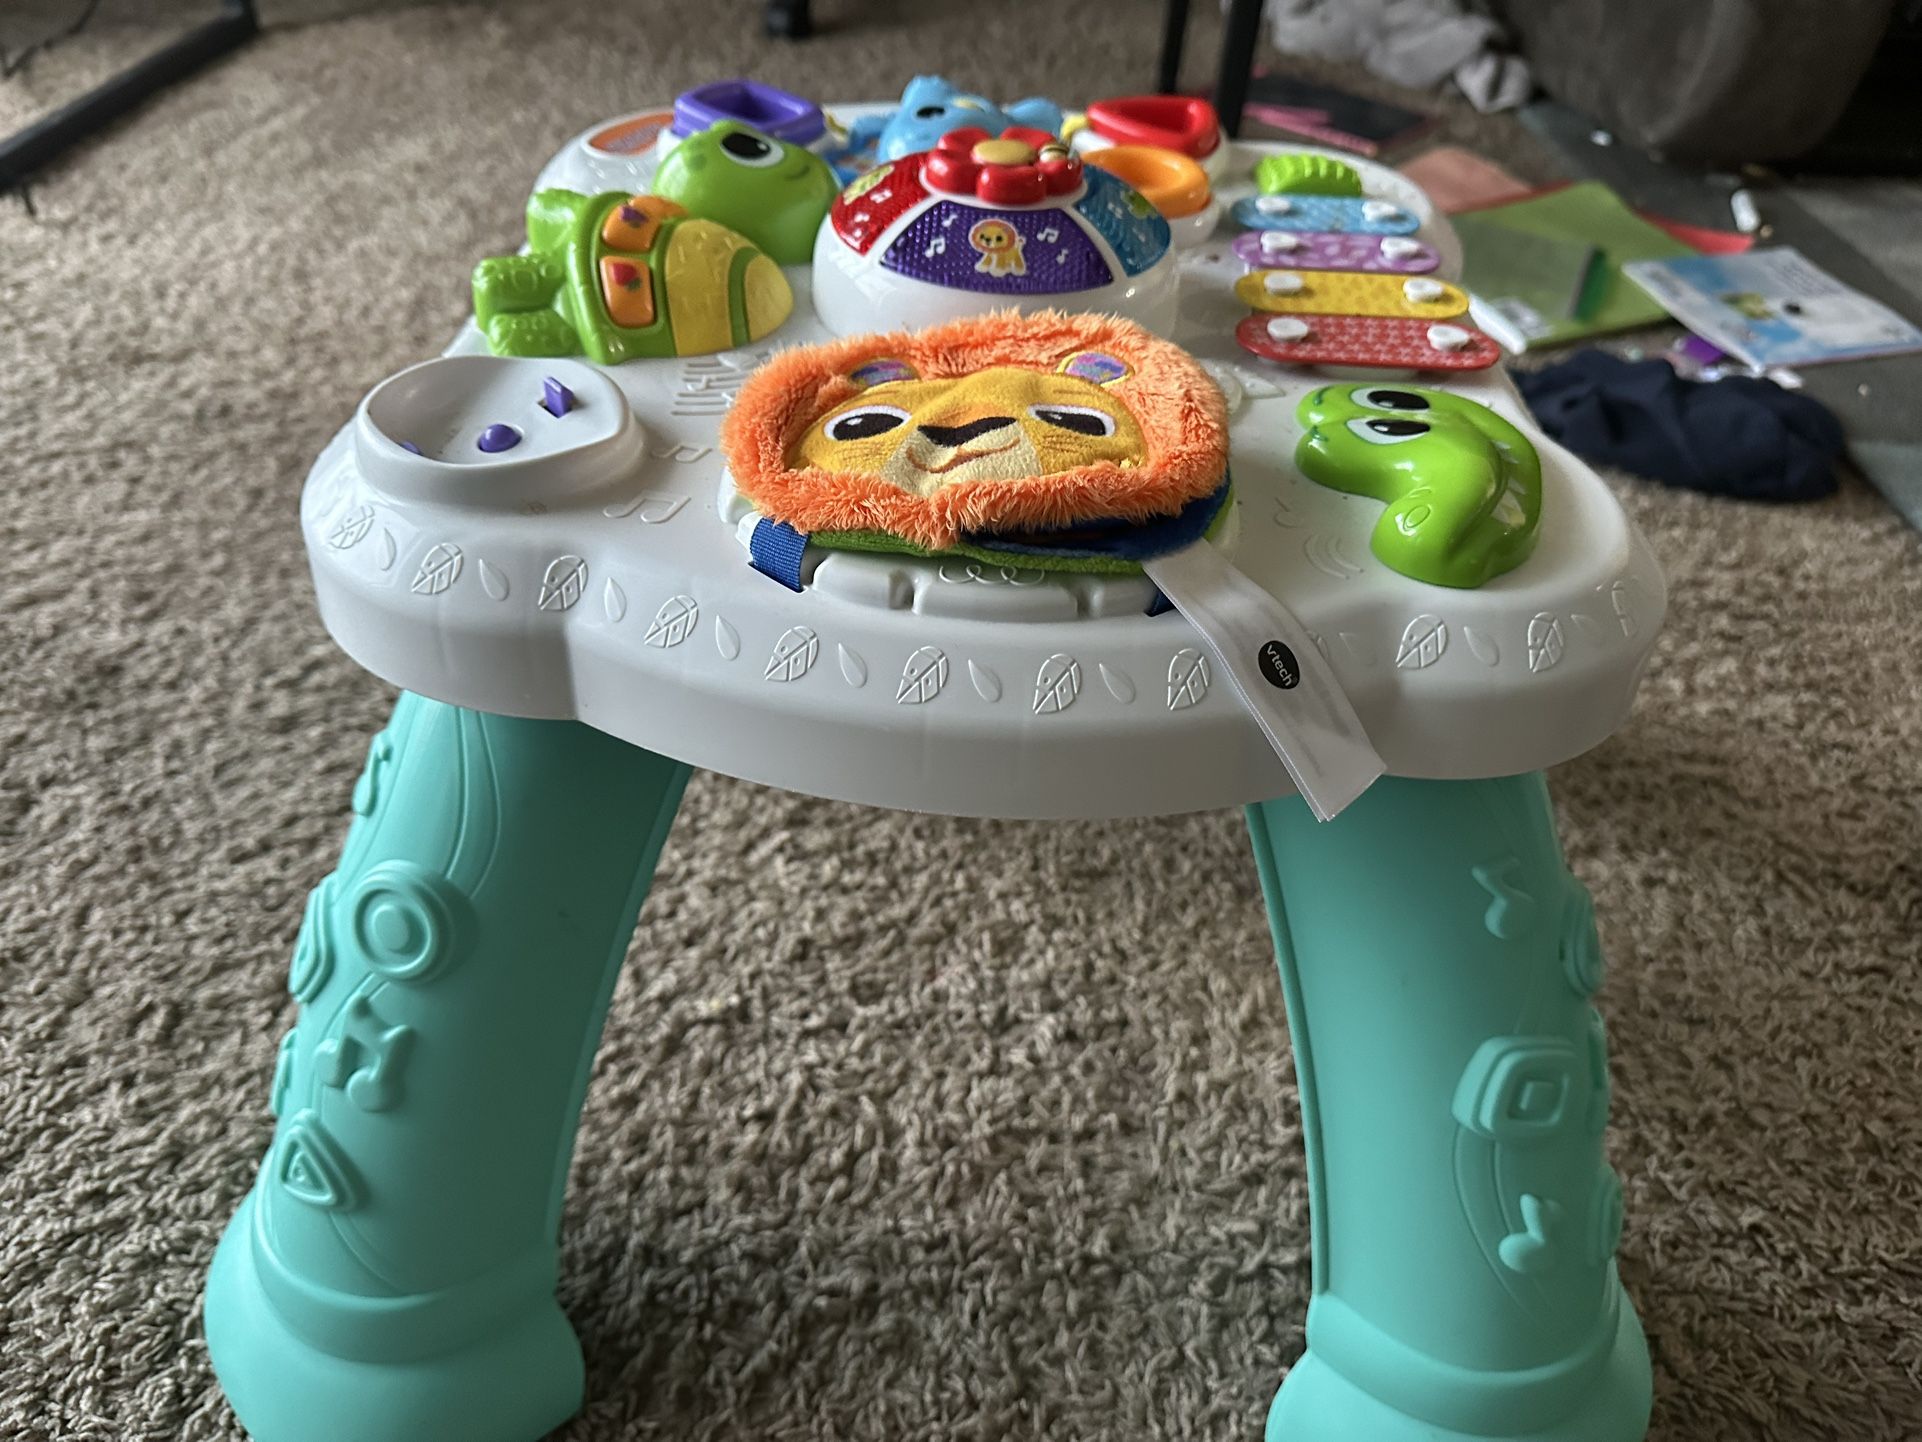 Toddler Touch And explore vtech table